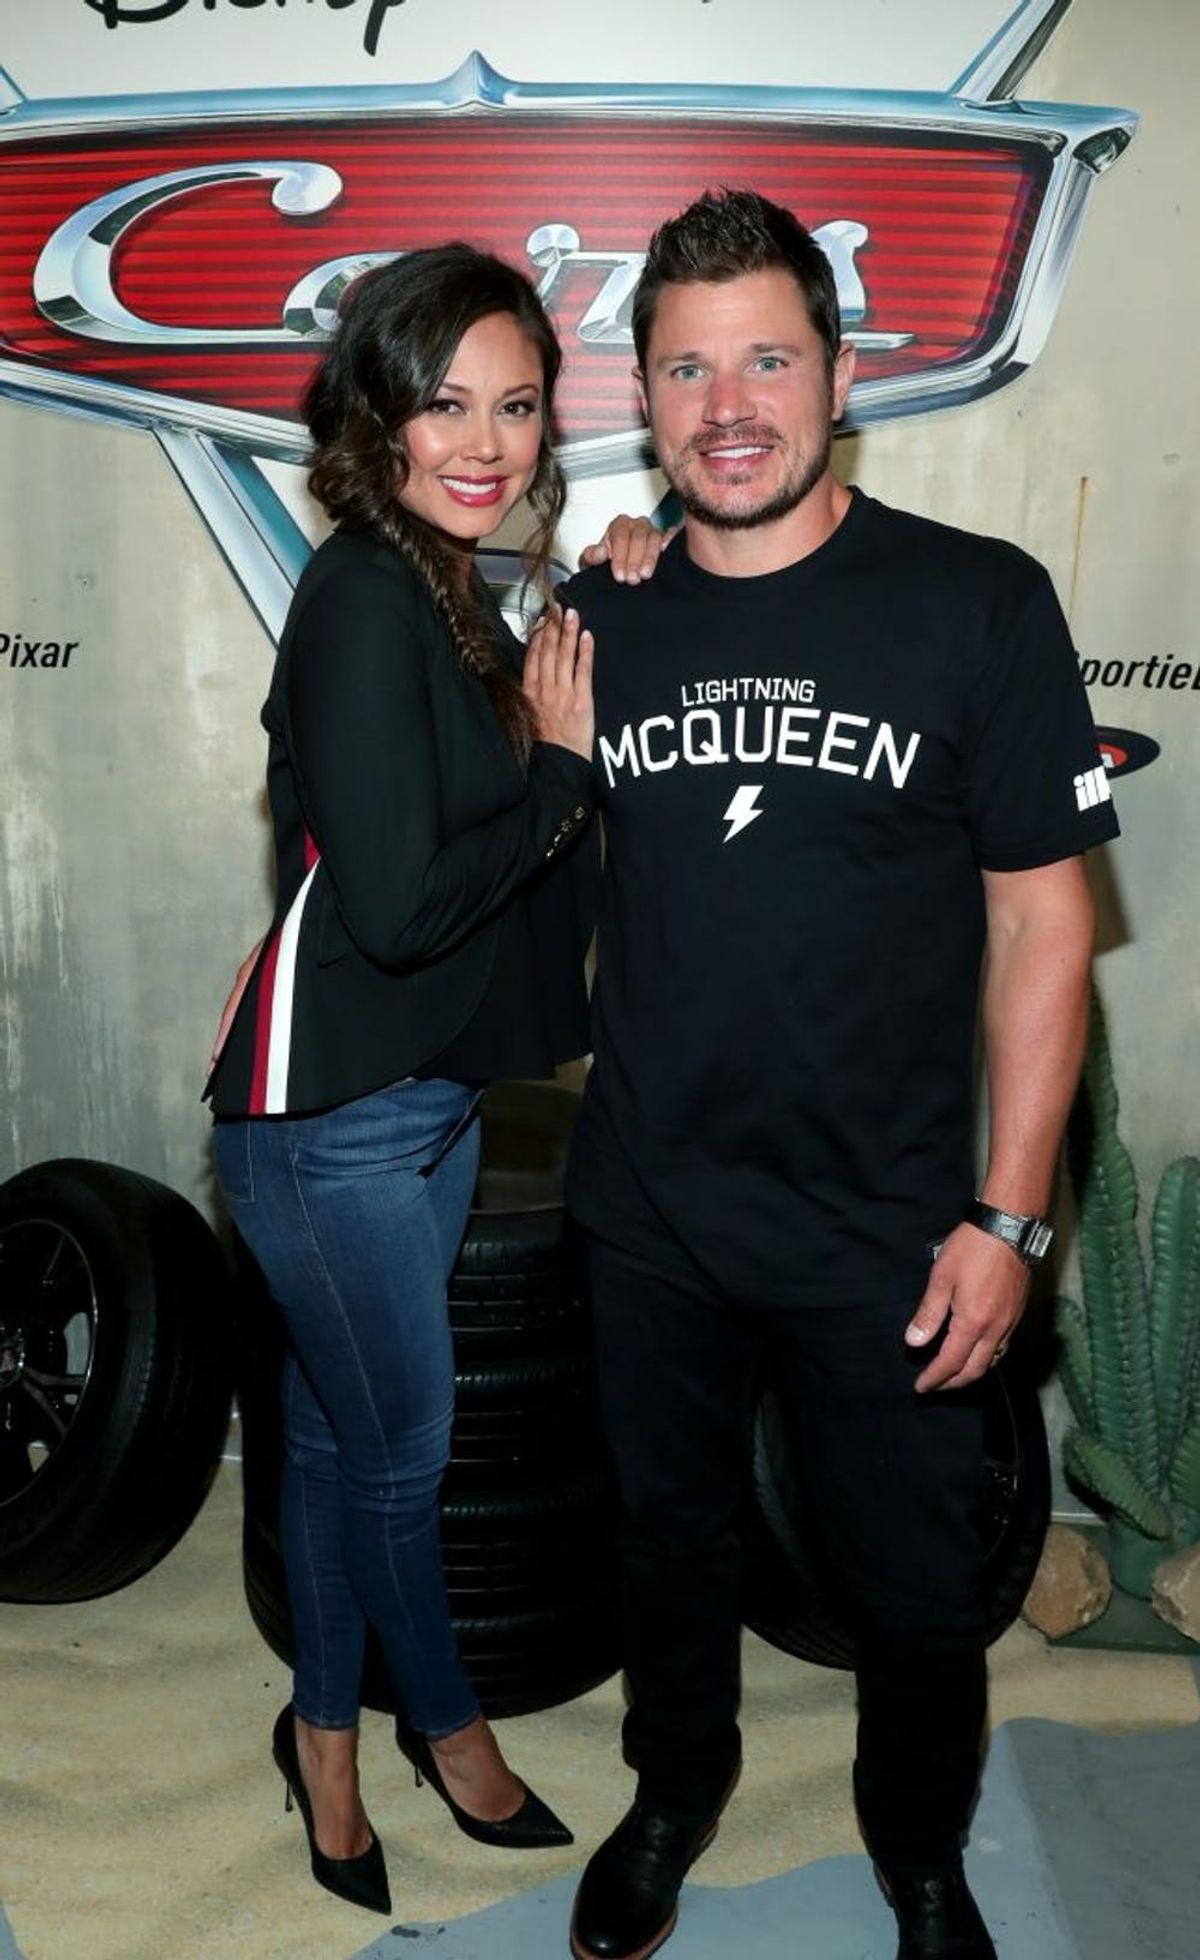 Nick Lachey Went for Maximum Gush With His Super Sweet Anniversary Message to Vanessa Lachey